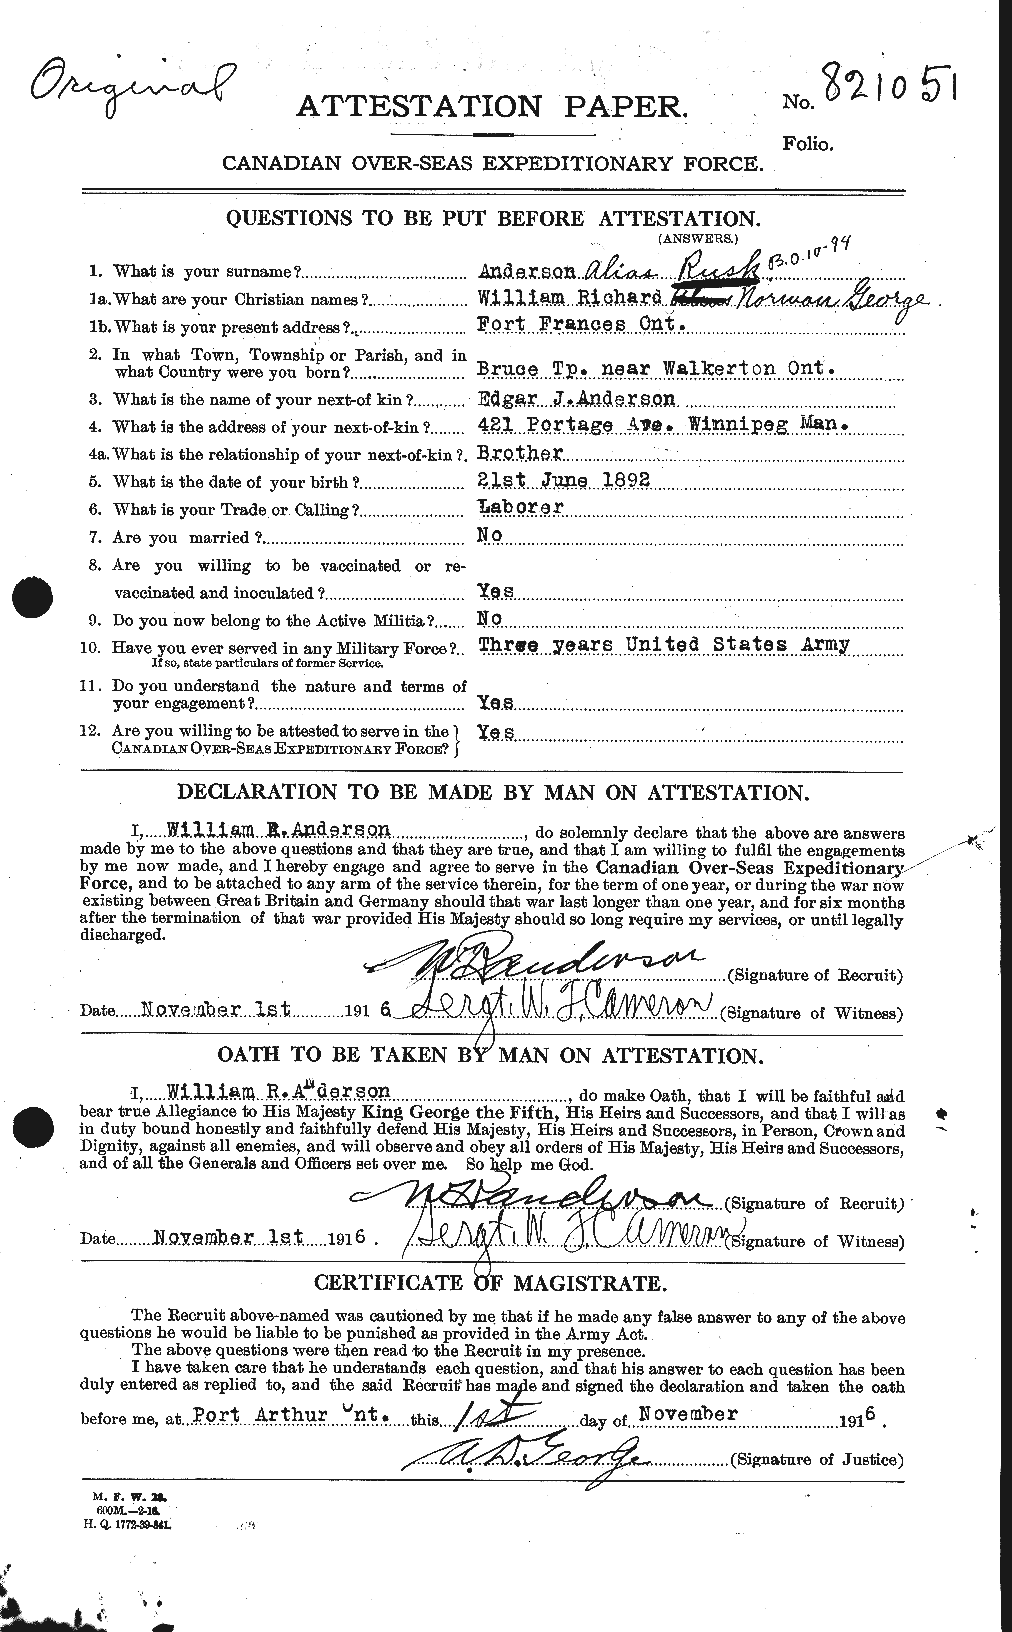 Personnel Records of the First World War - CEF 616878a